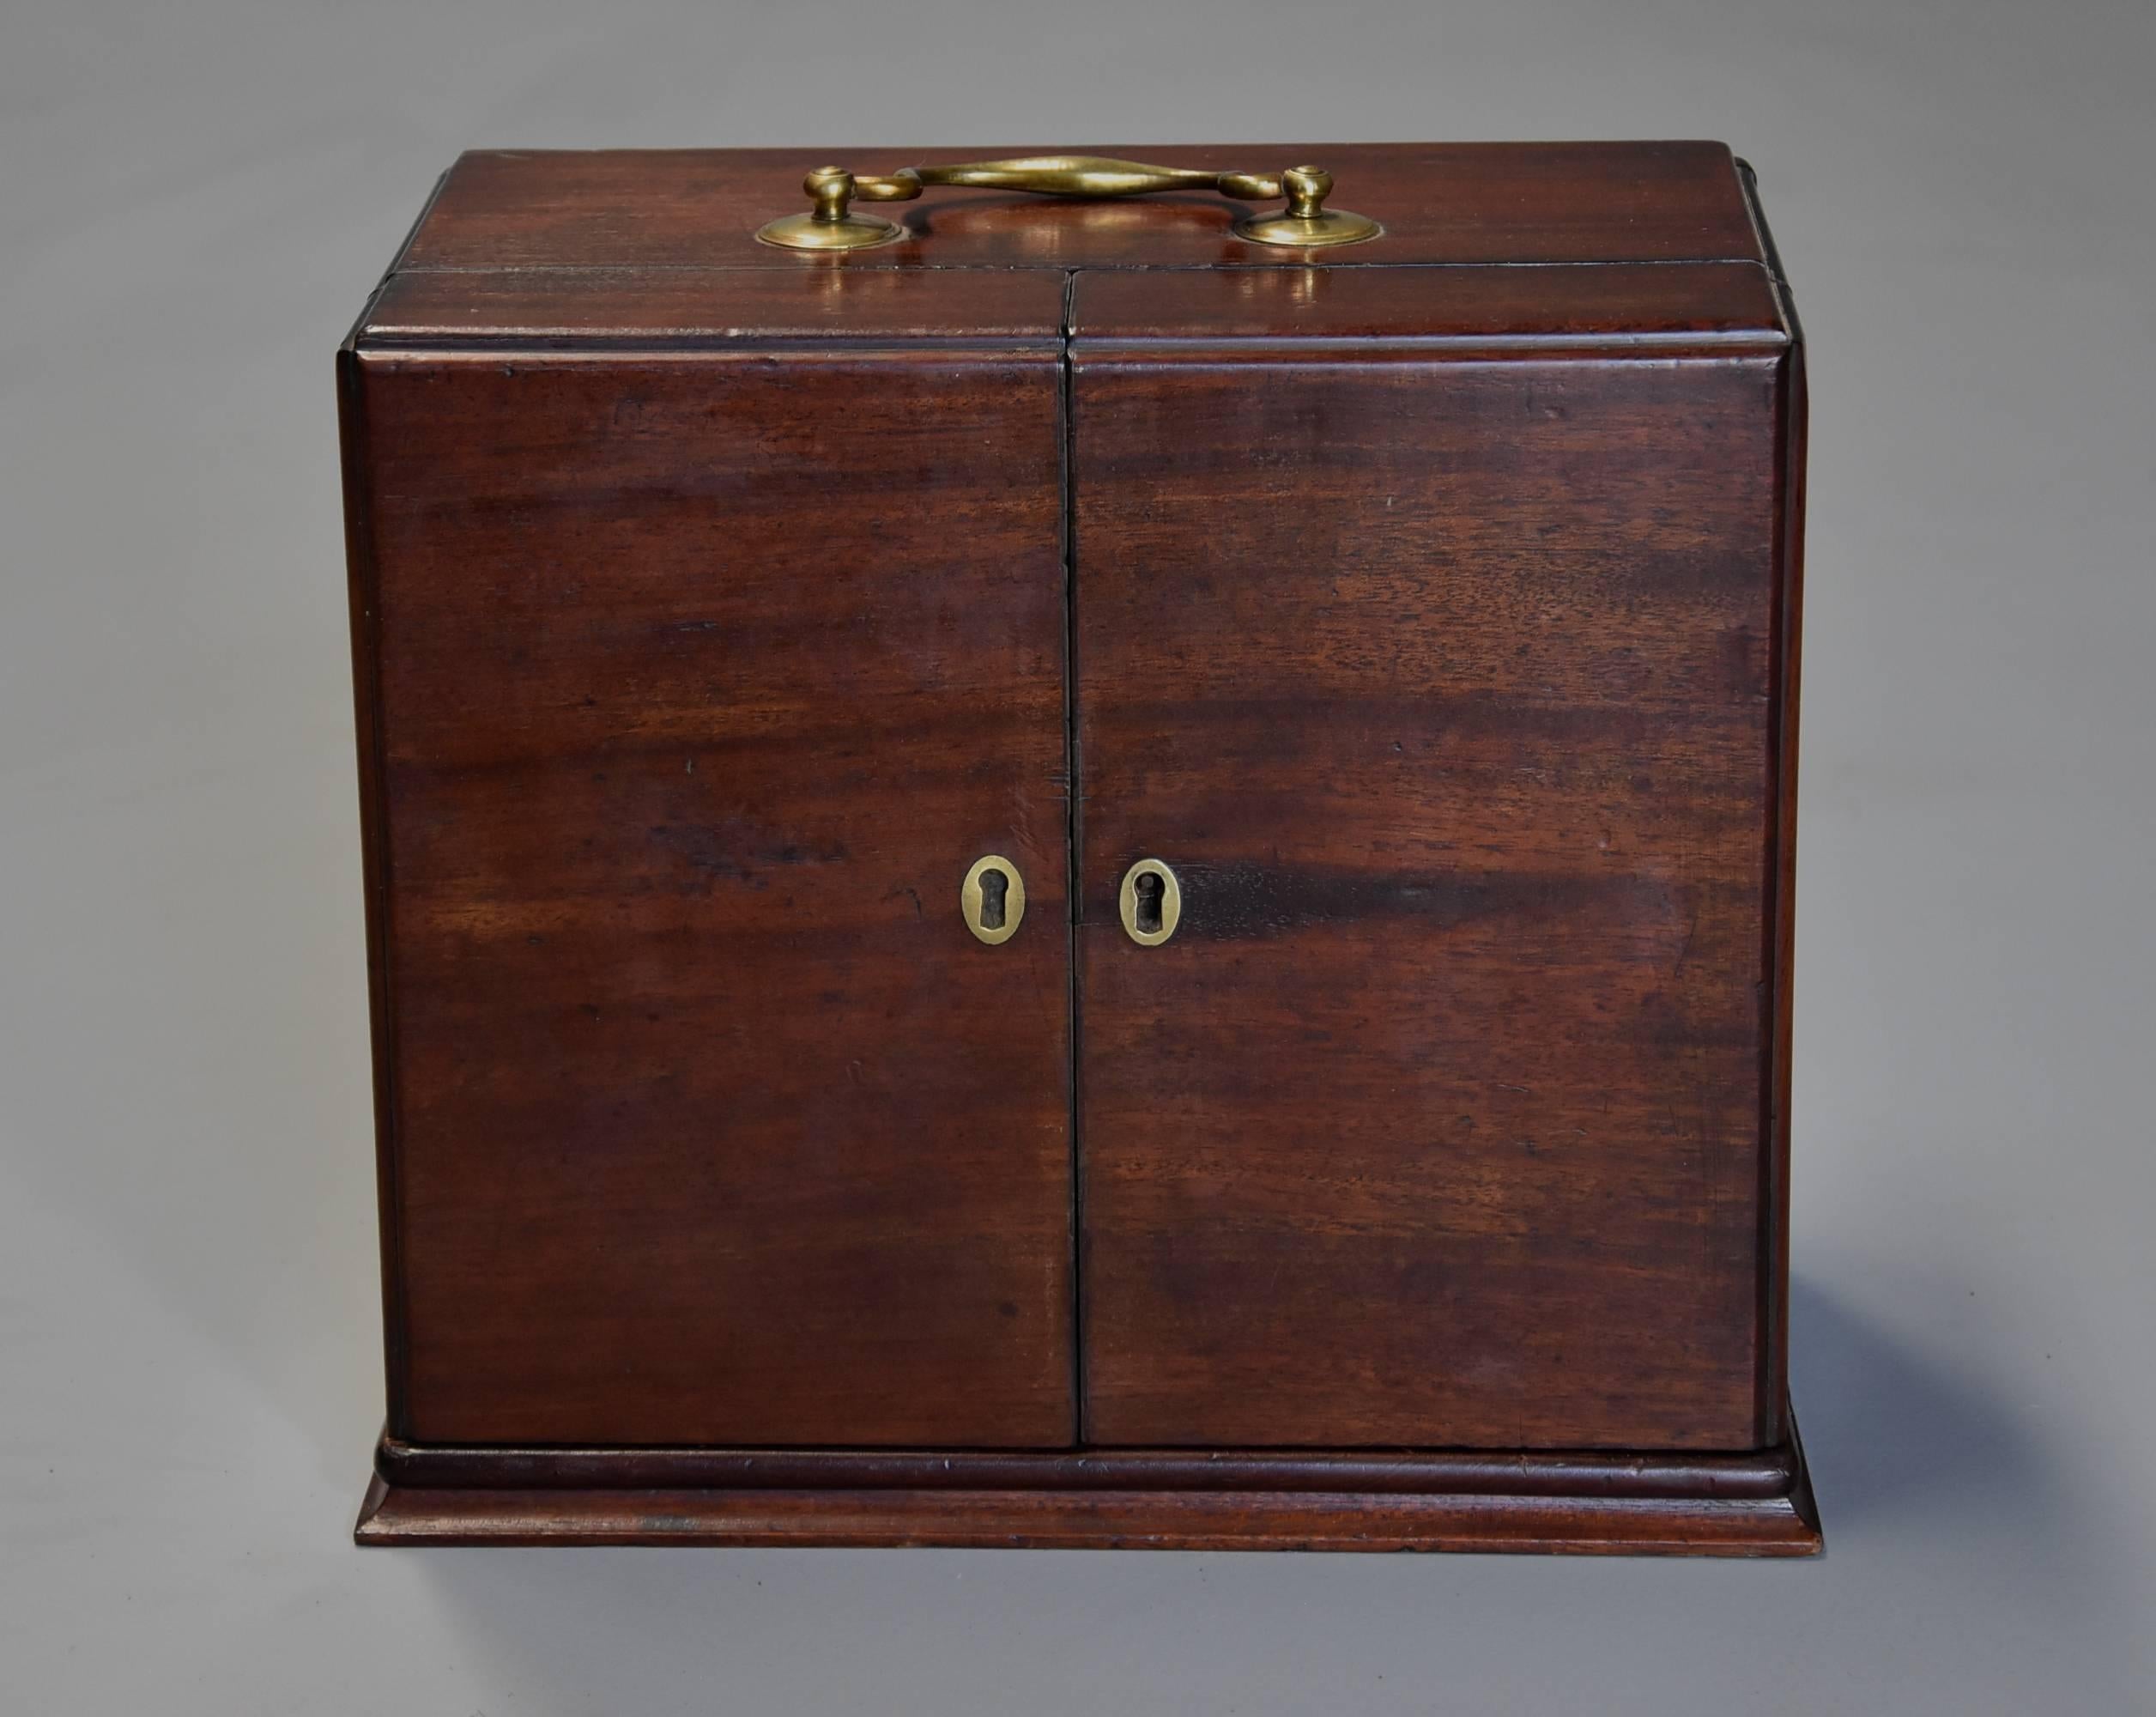 A mid-19th century (circa 1850) mahogany travelling apothecary cabinet.

This cabinet consists of a mahogany case with brass swan neck carrying handle to the top leading down to two doors with two oval brass escutcheons.

The doors opening to